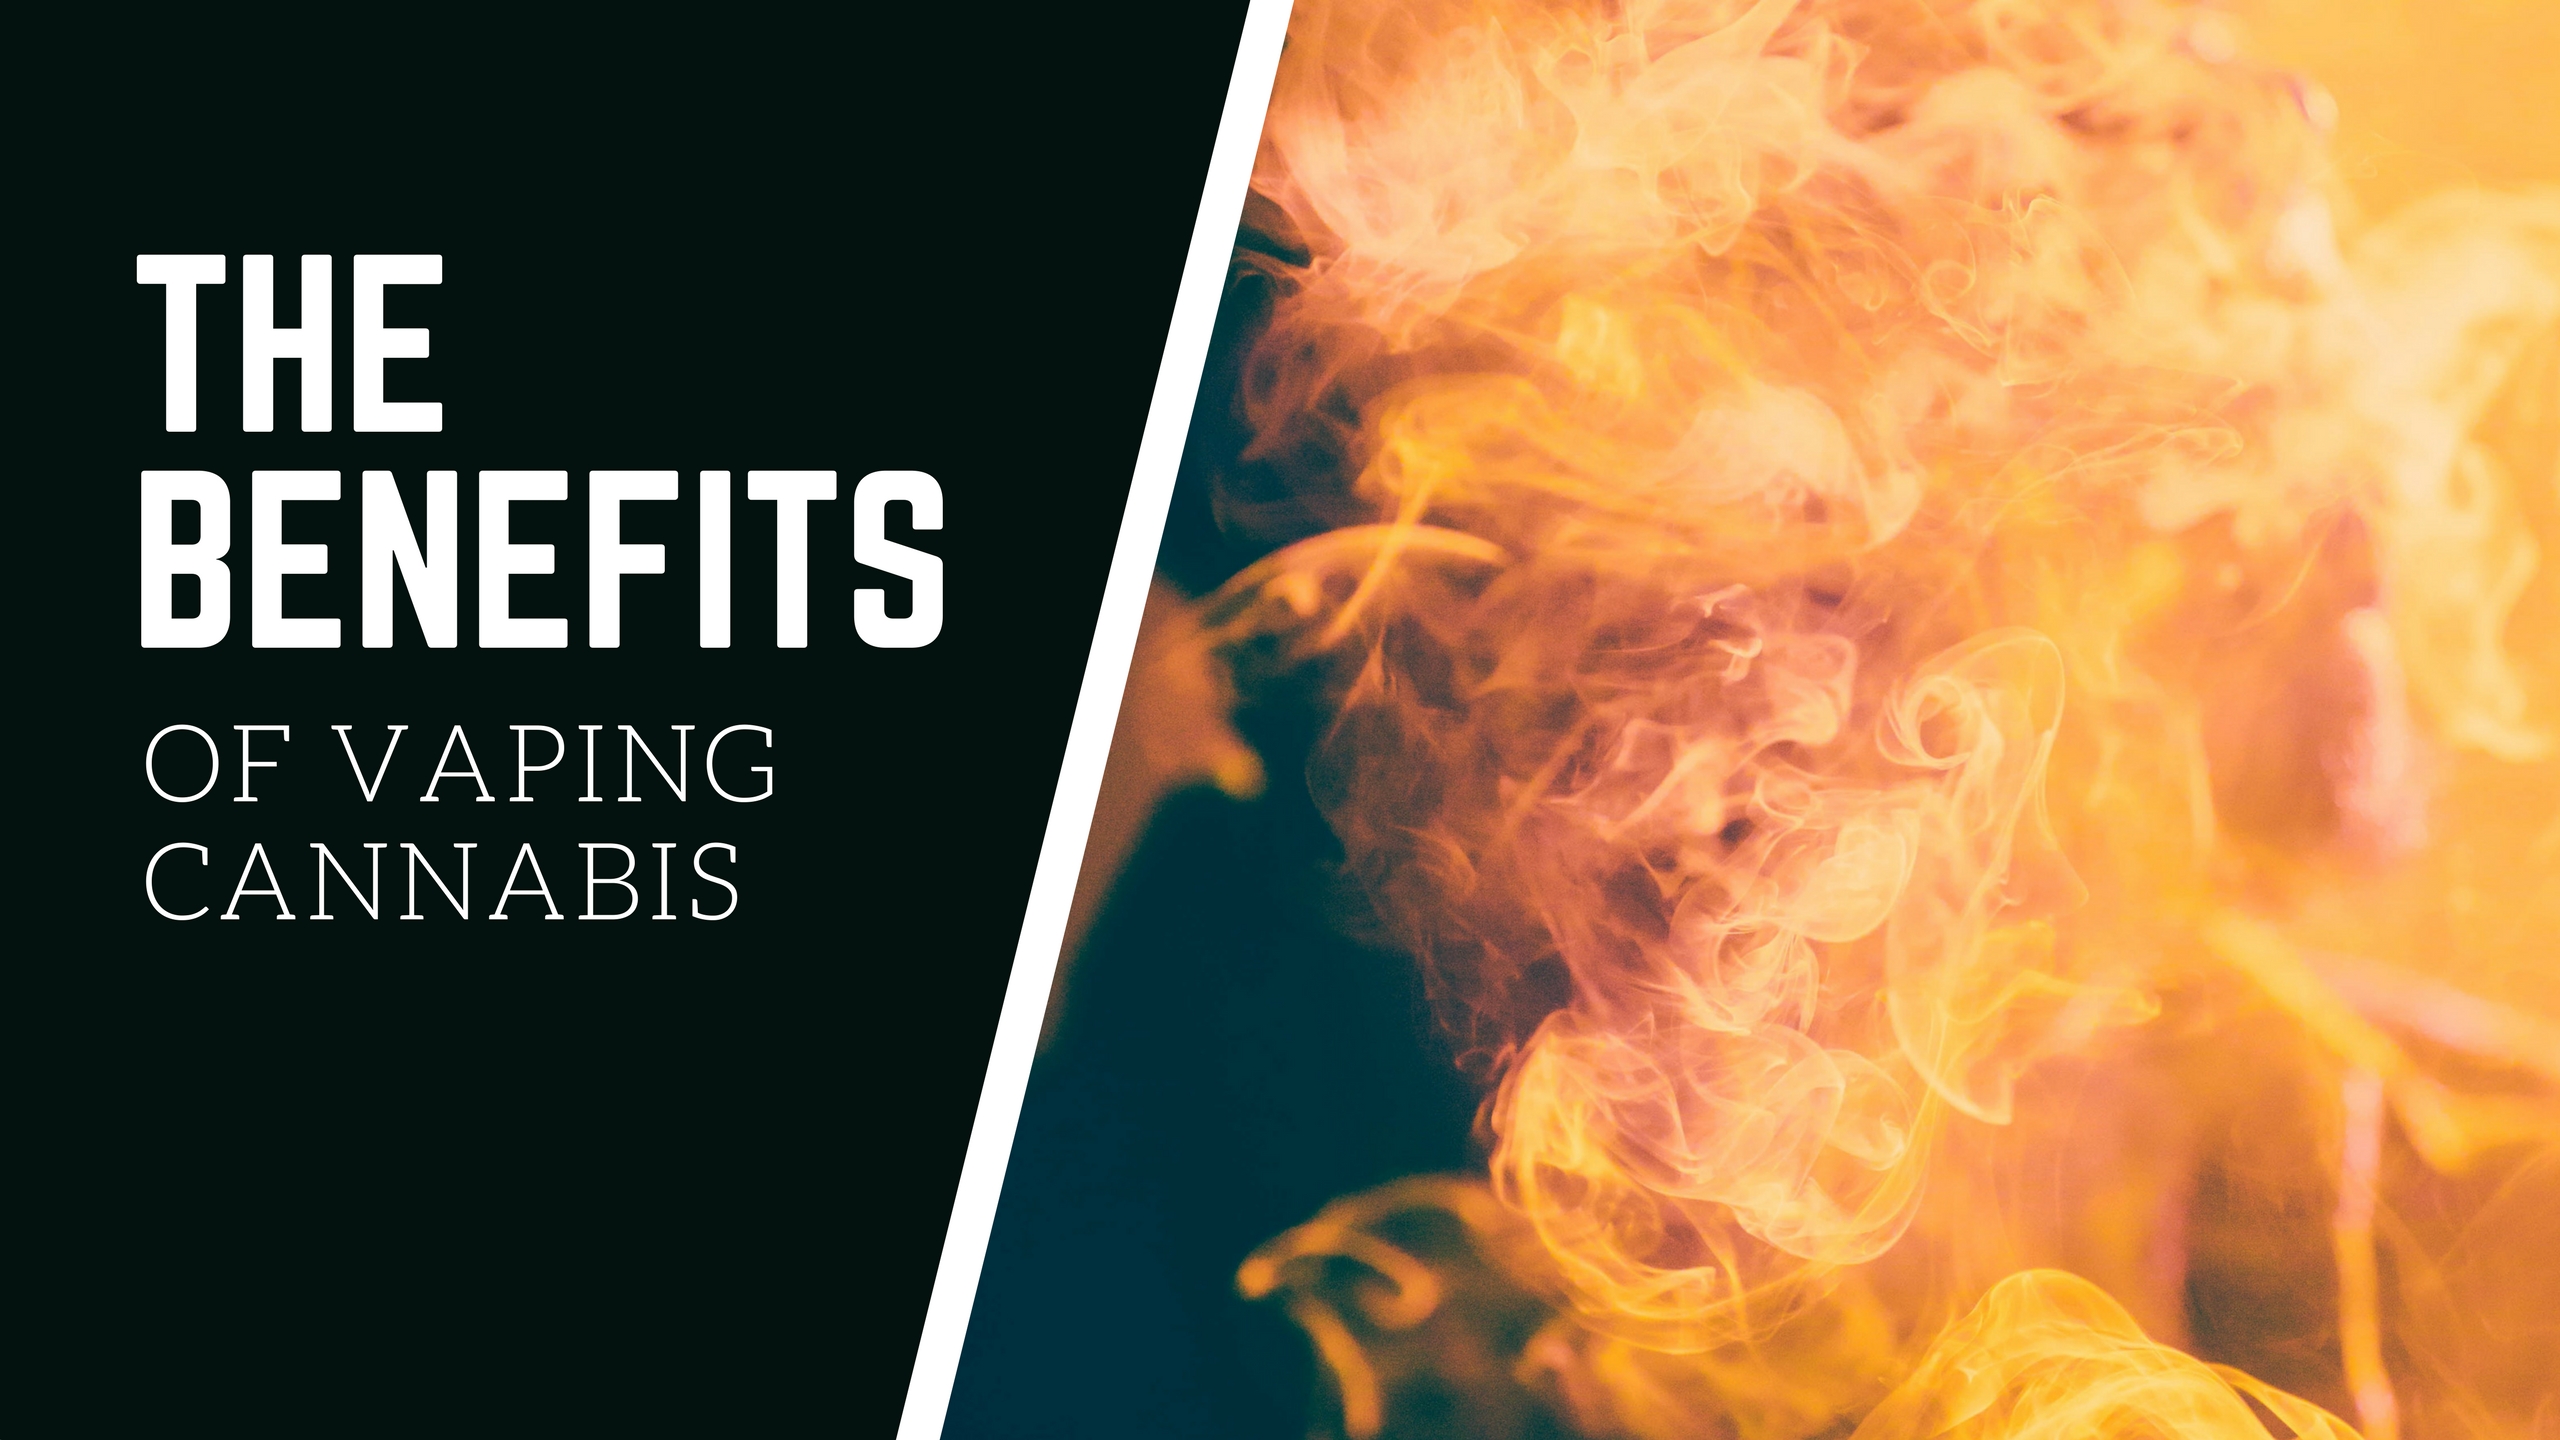 The Benefits of Vaping Cannabis